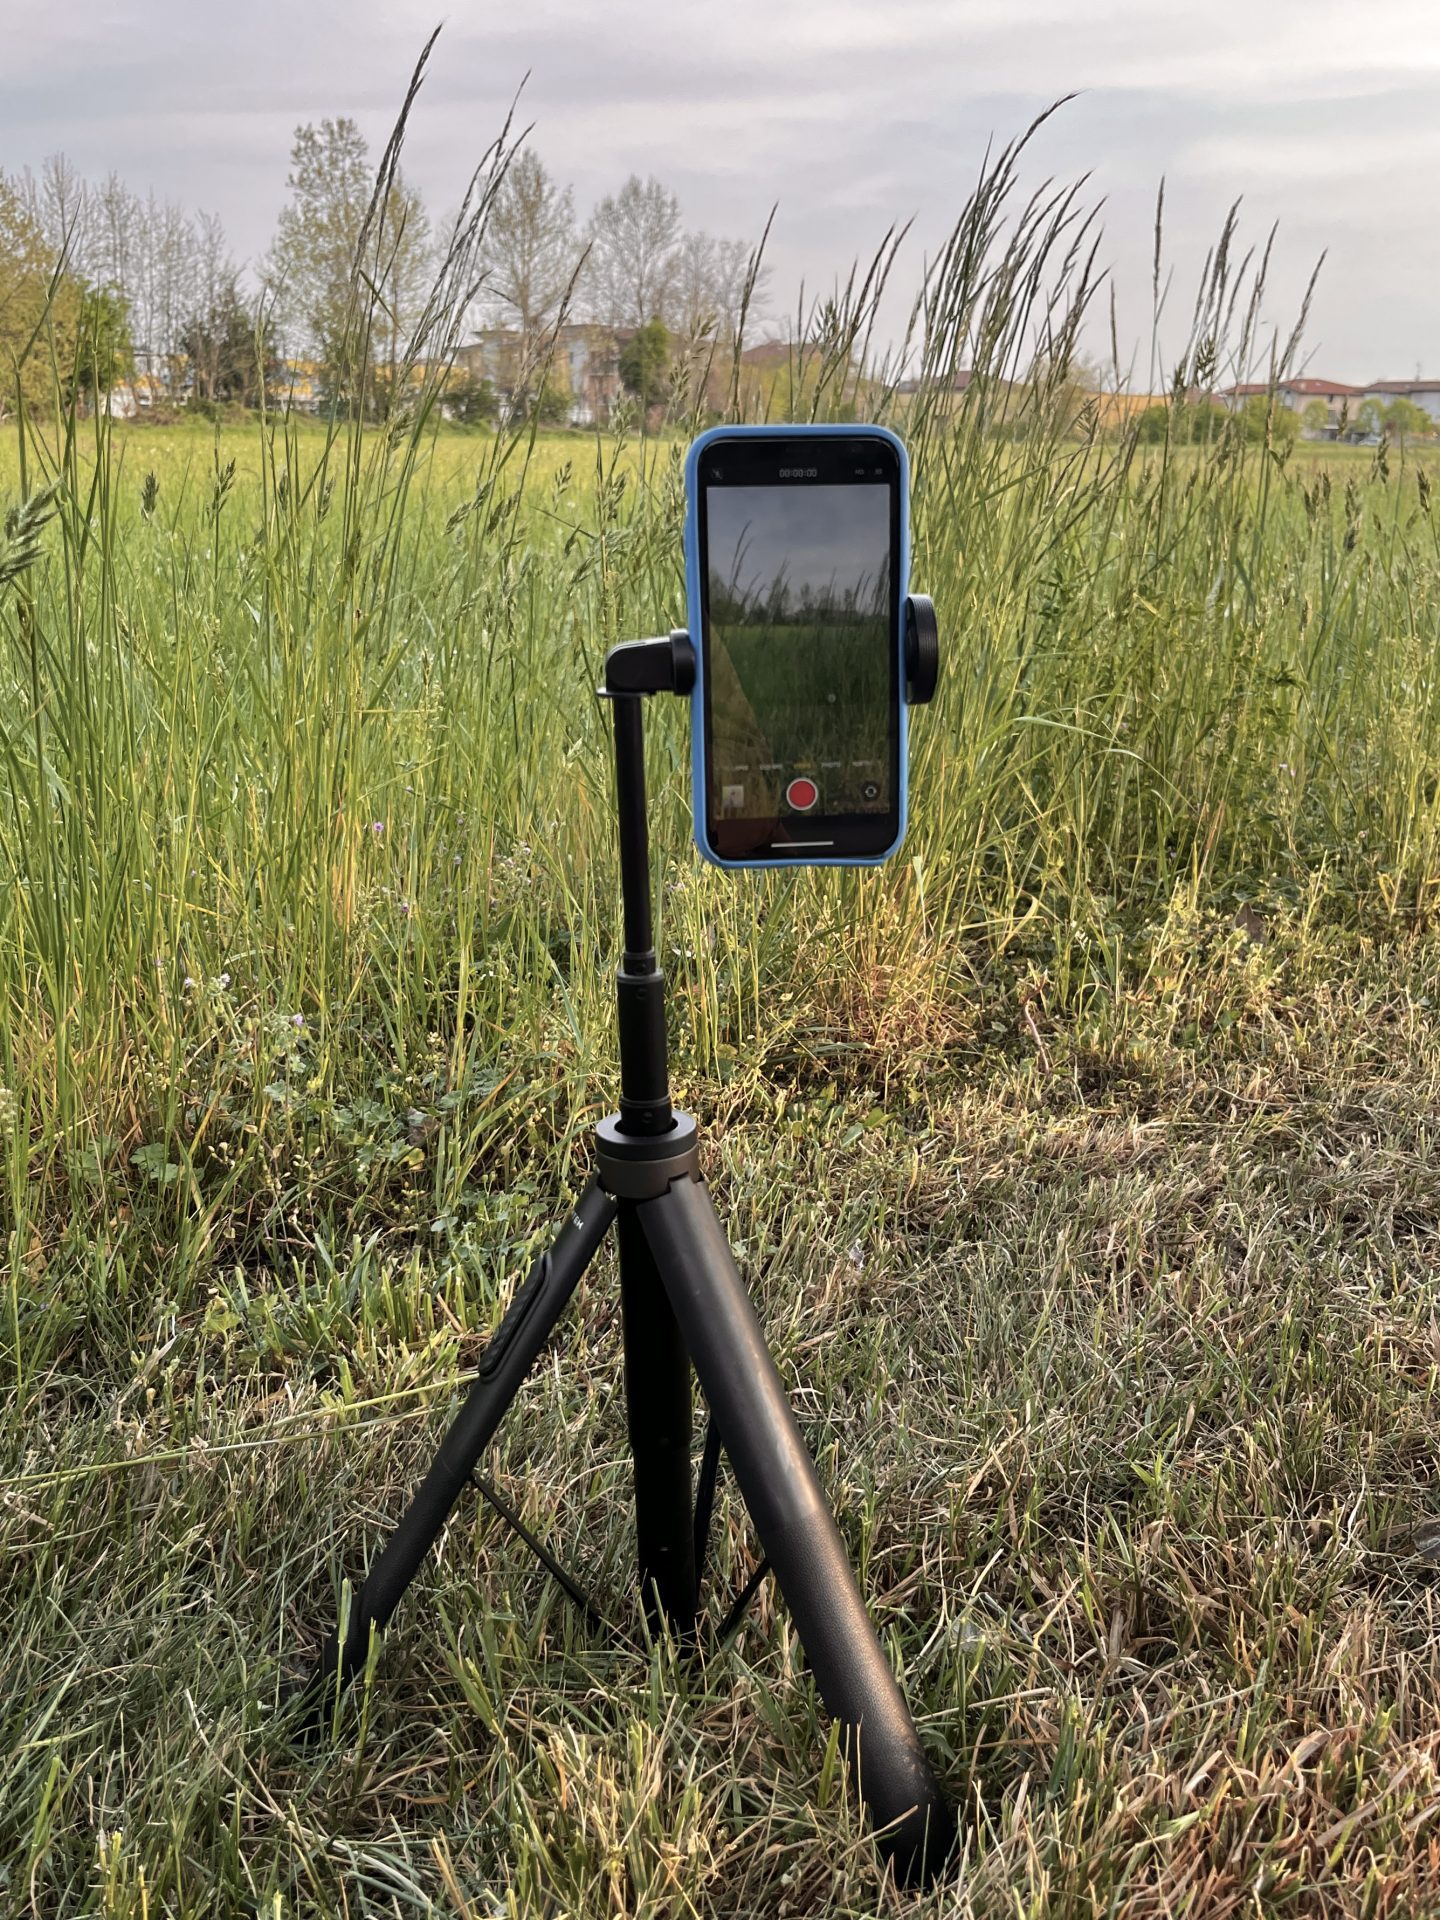 iPhone on tripod in middle of green, grassy meadow taking a travel photo